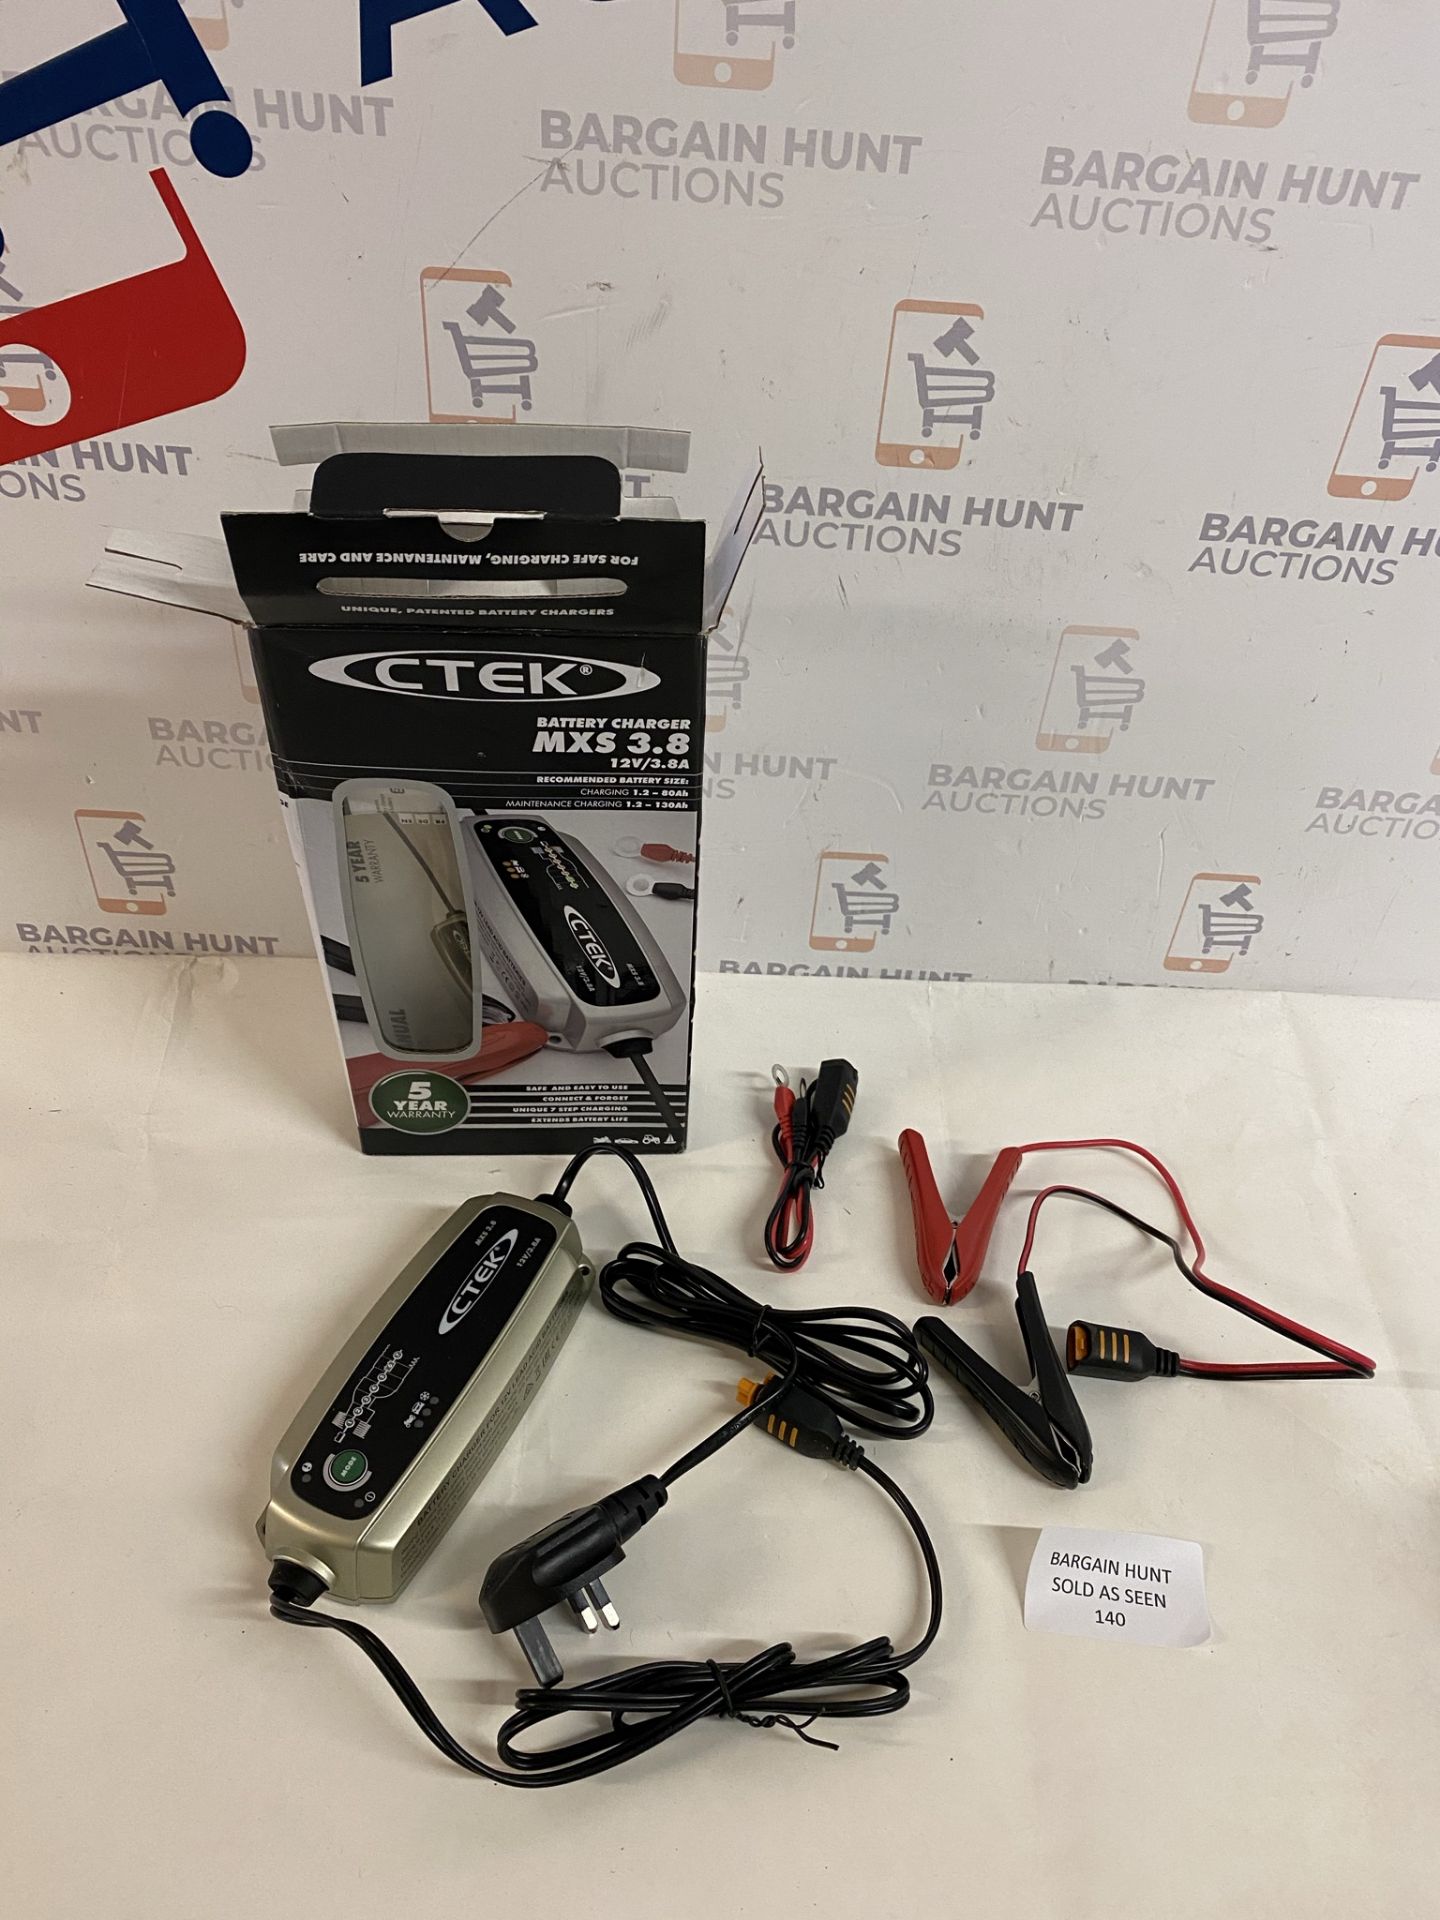 CTEK MXS 3.8 Multi Functional Battery Charger (no power) RRP £60